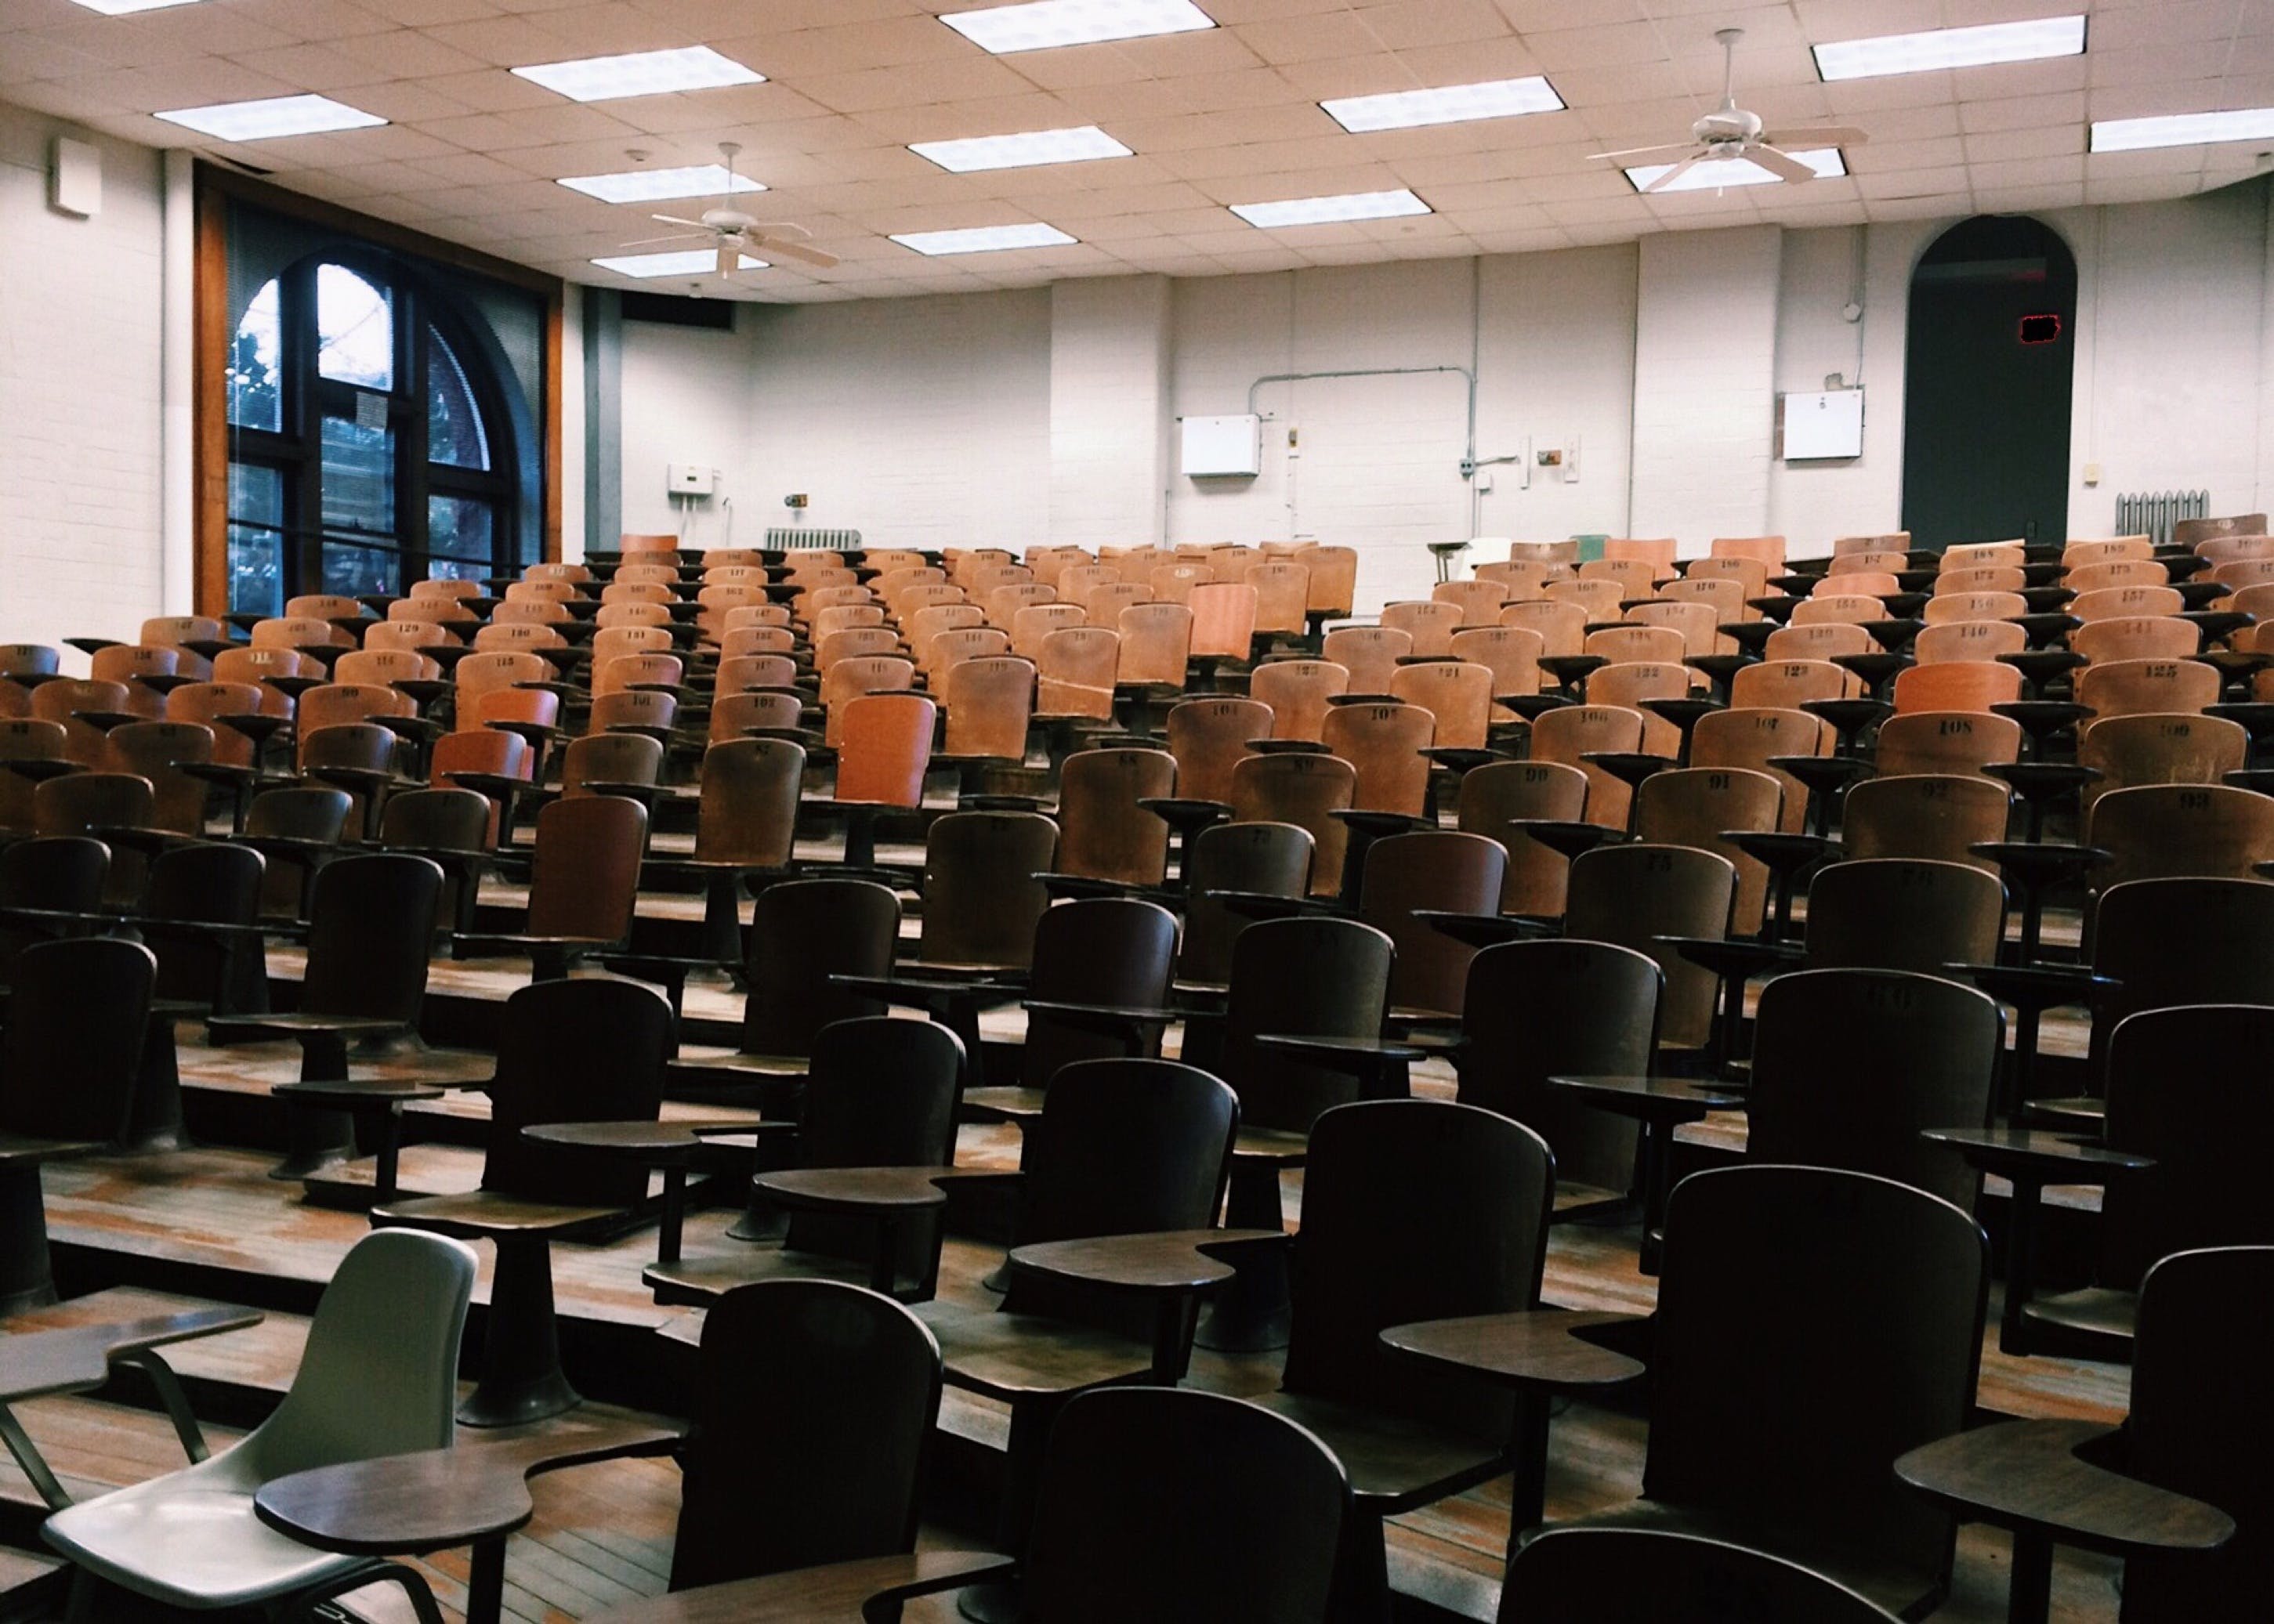 University lecture hall with rows of chairs